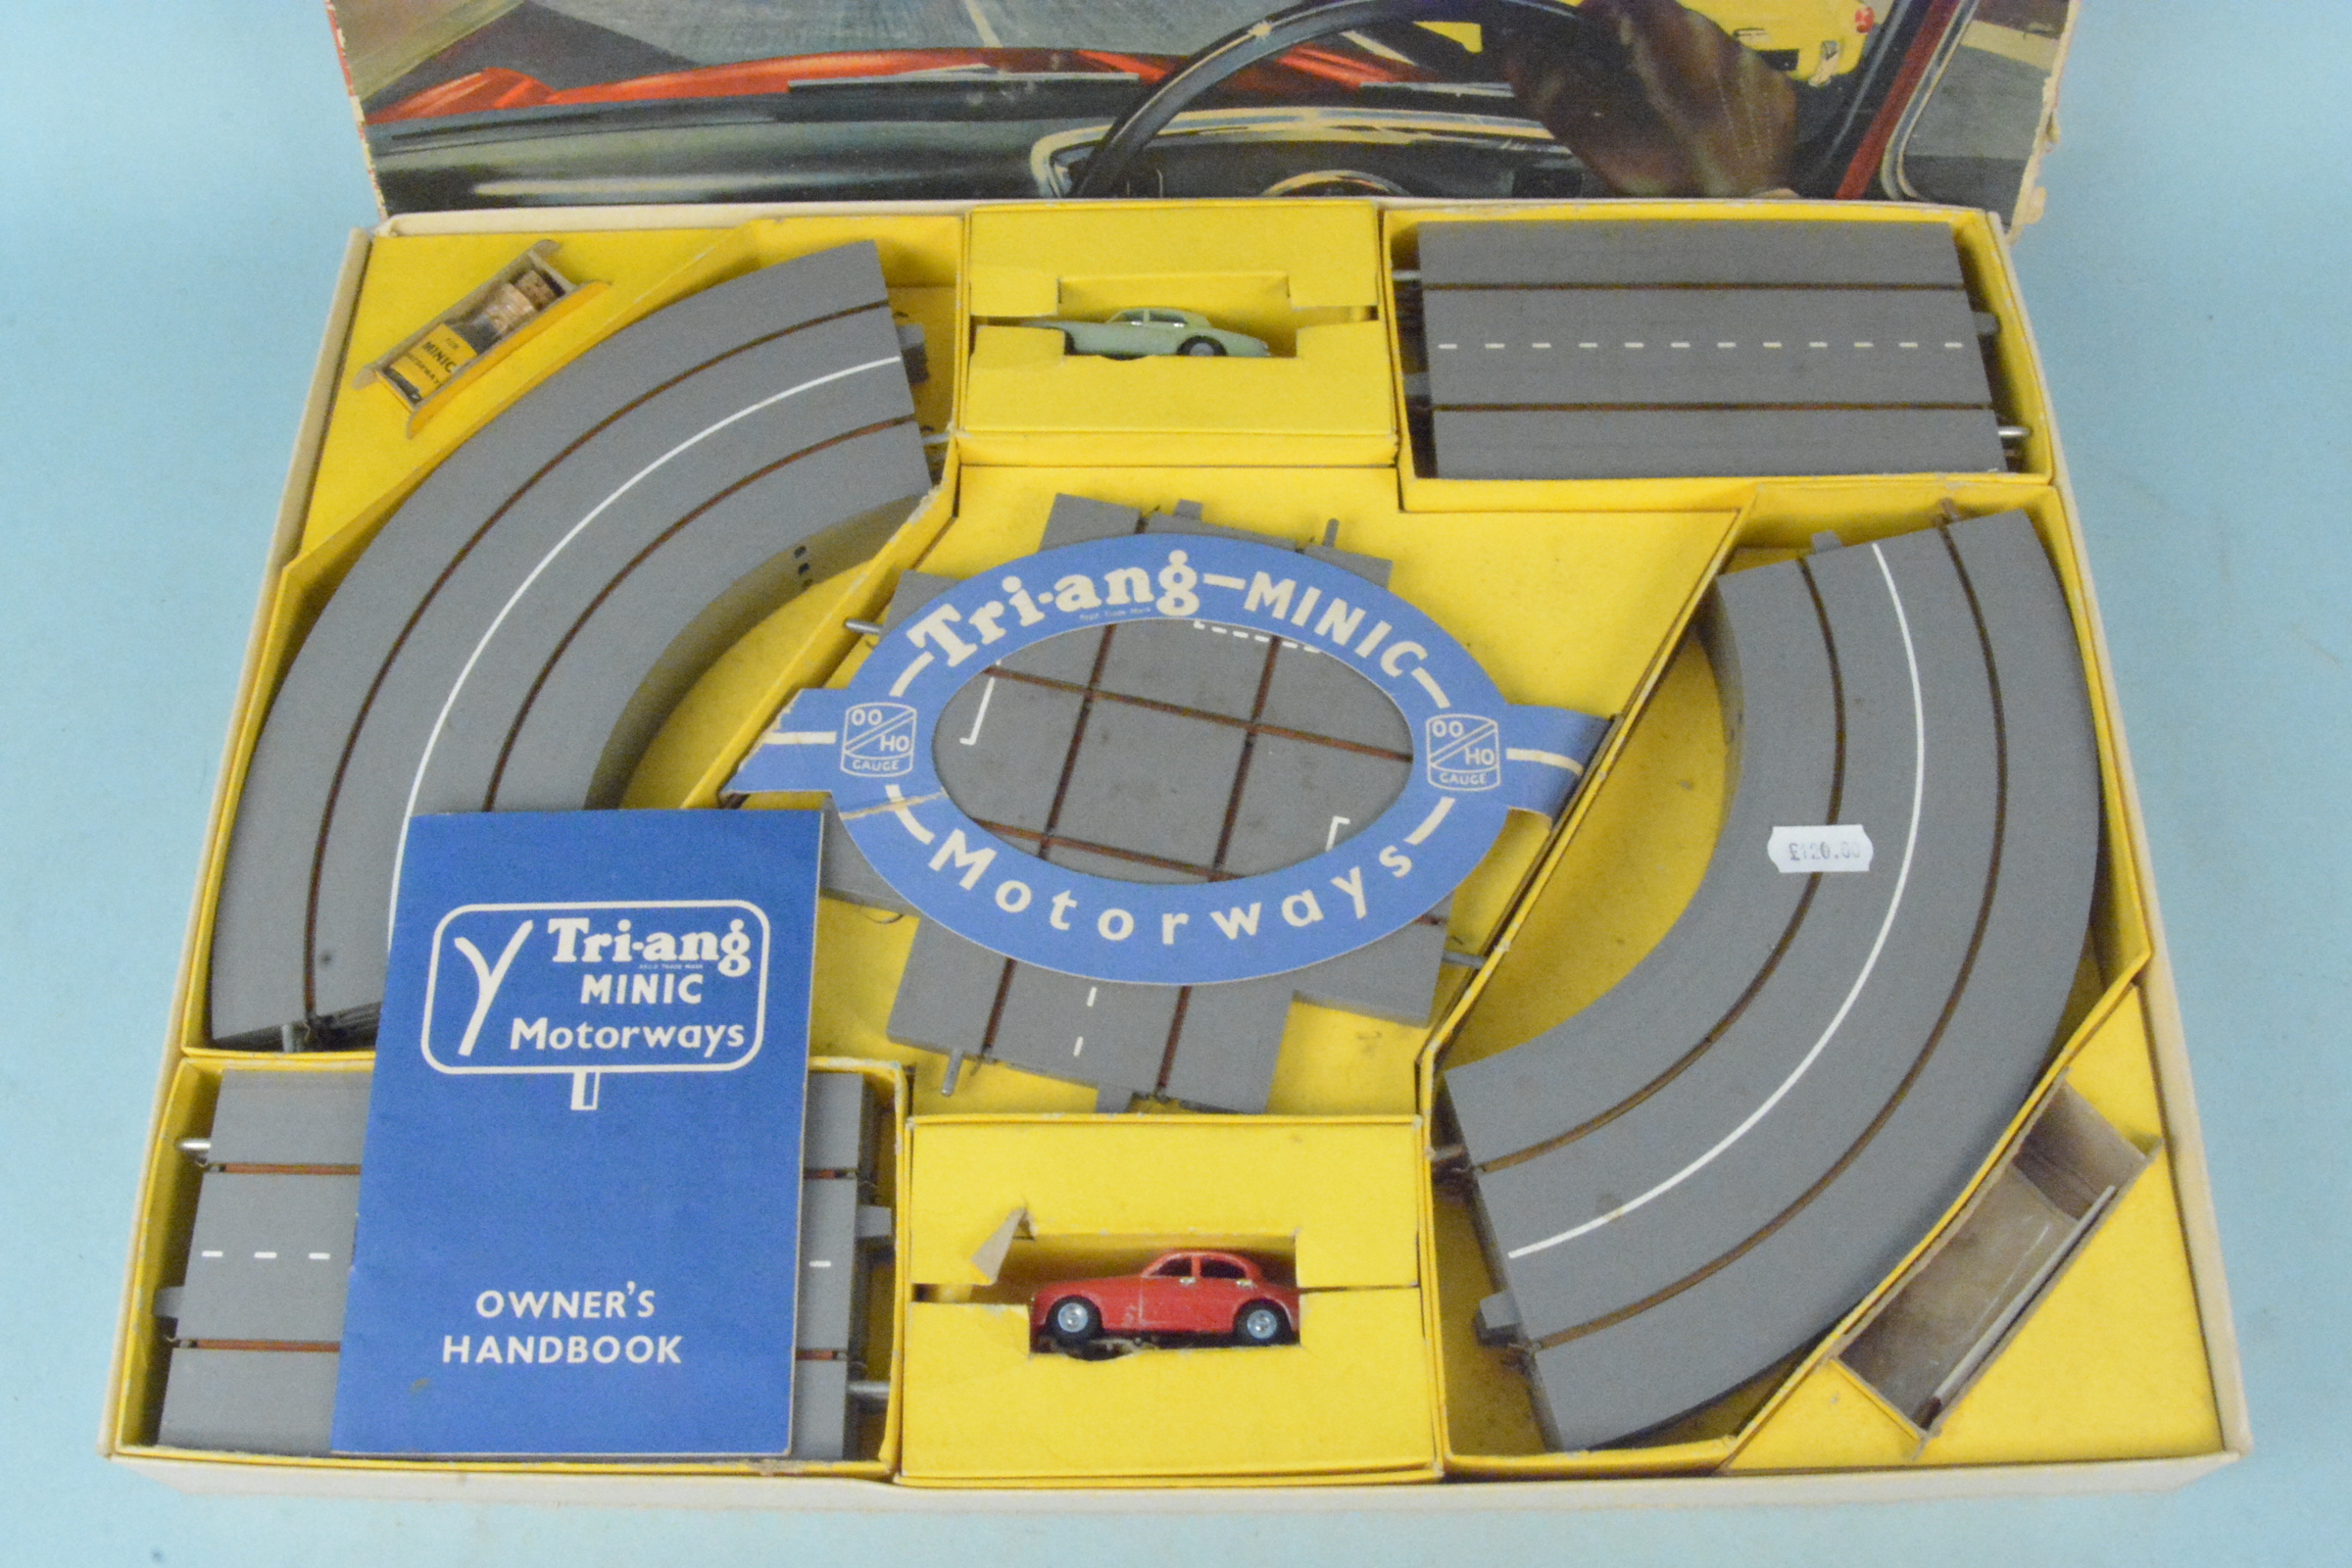 Boxed vintage Triang minic motorways M1503, contents appear complete (in mild playworn condition, - Image 2 of 3